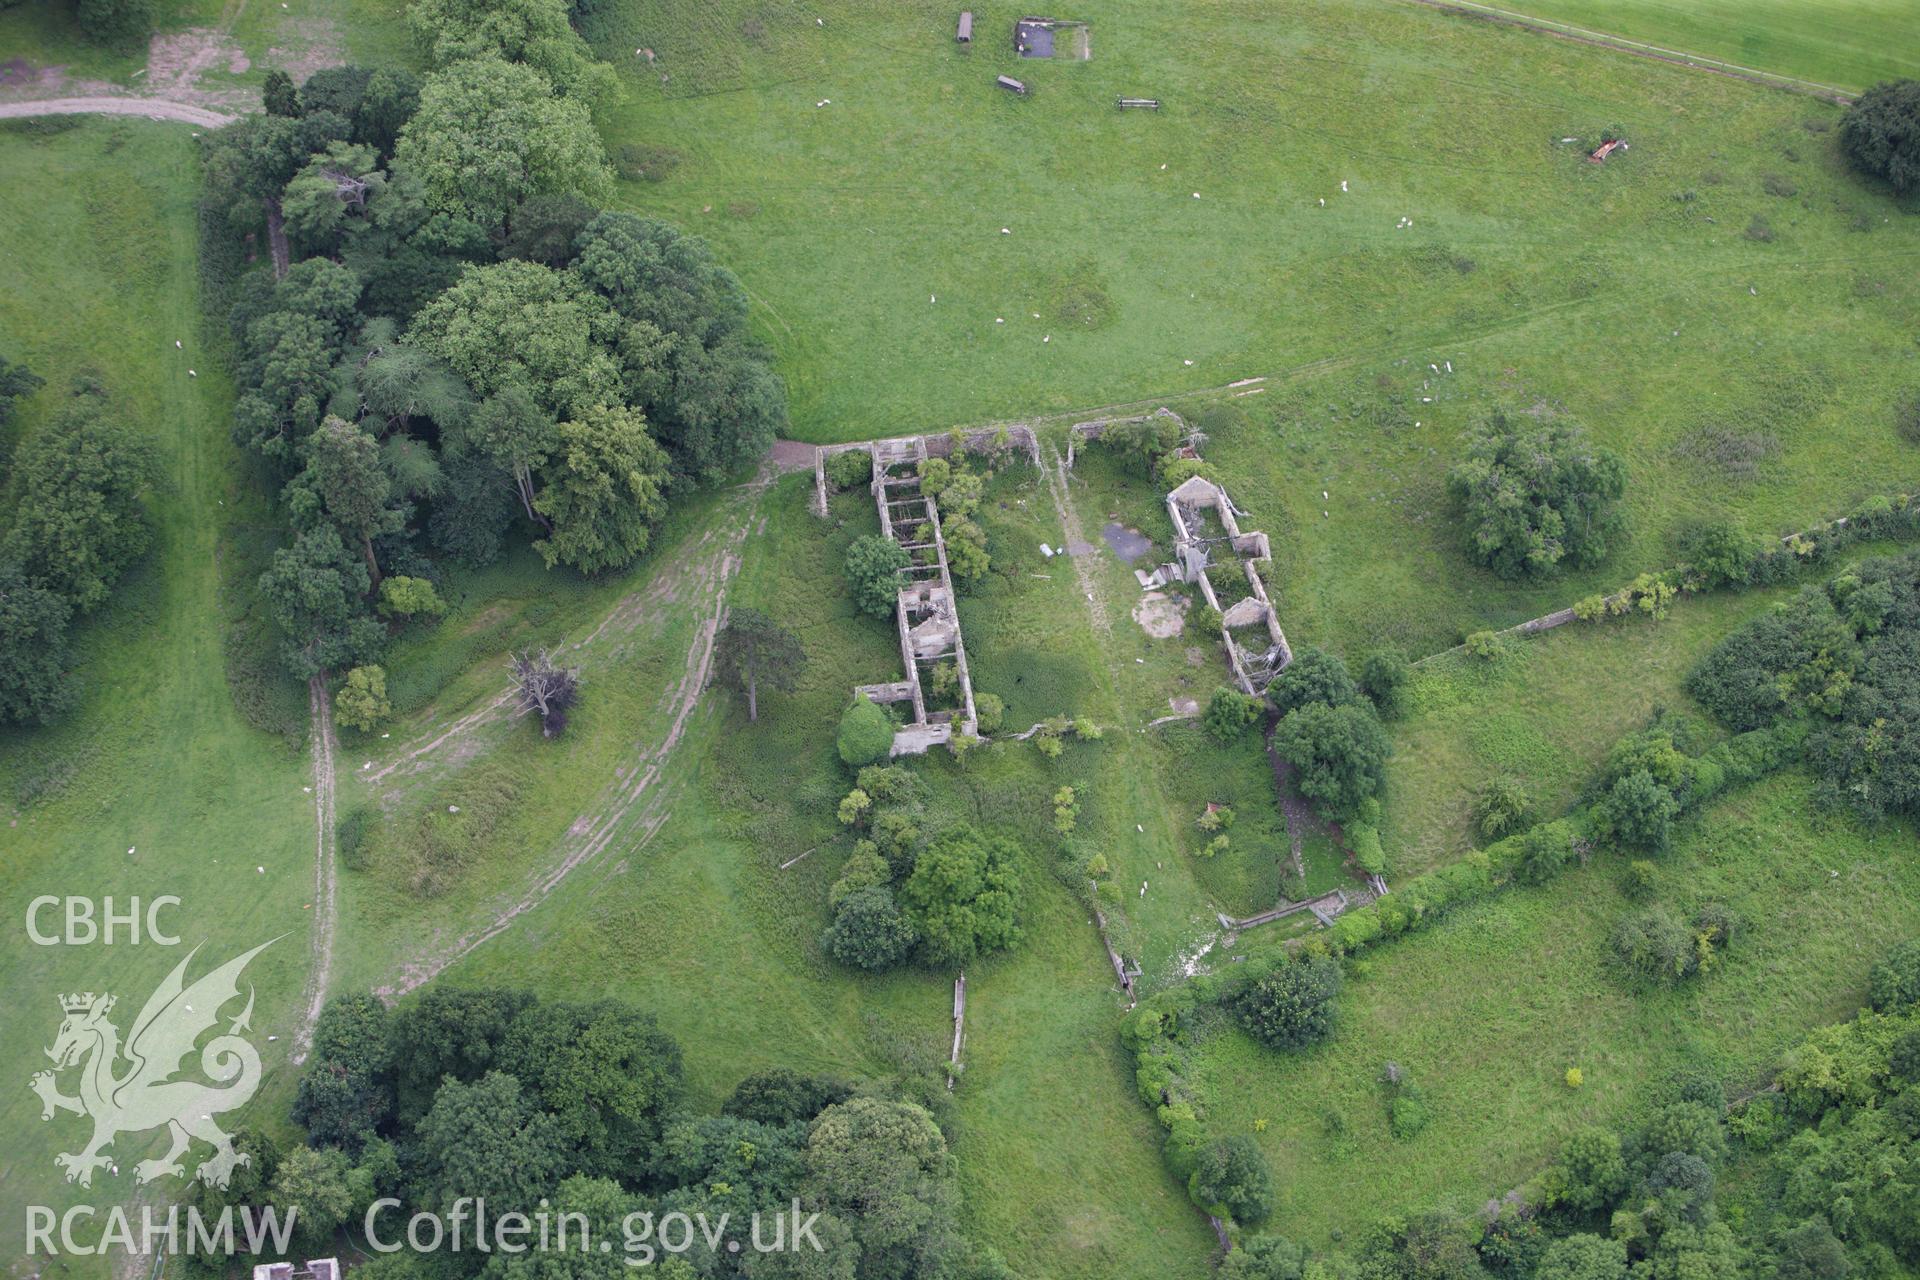 RCAHMW colour oblique aerial photograph showing ruins of Piercefield Park. Taken on 09 July 2009 by Toby Driver